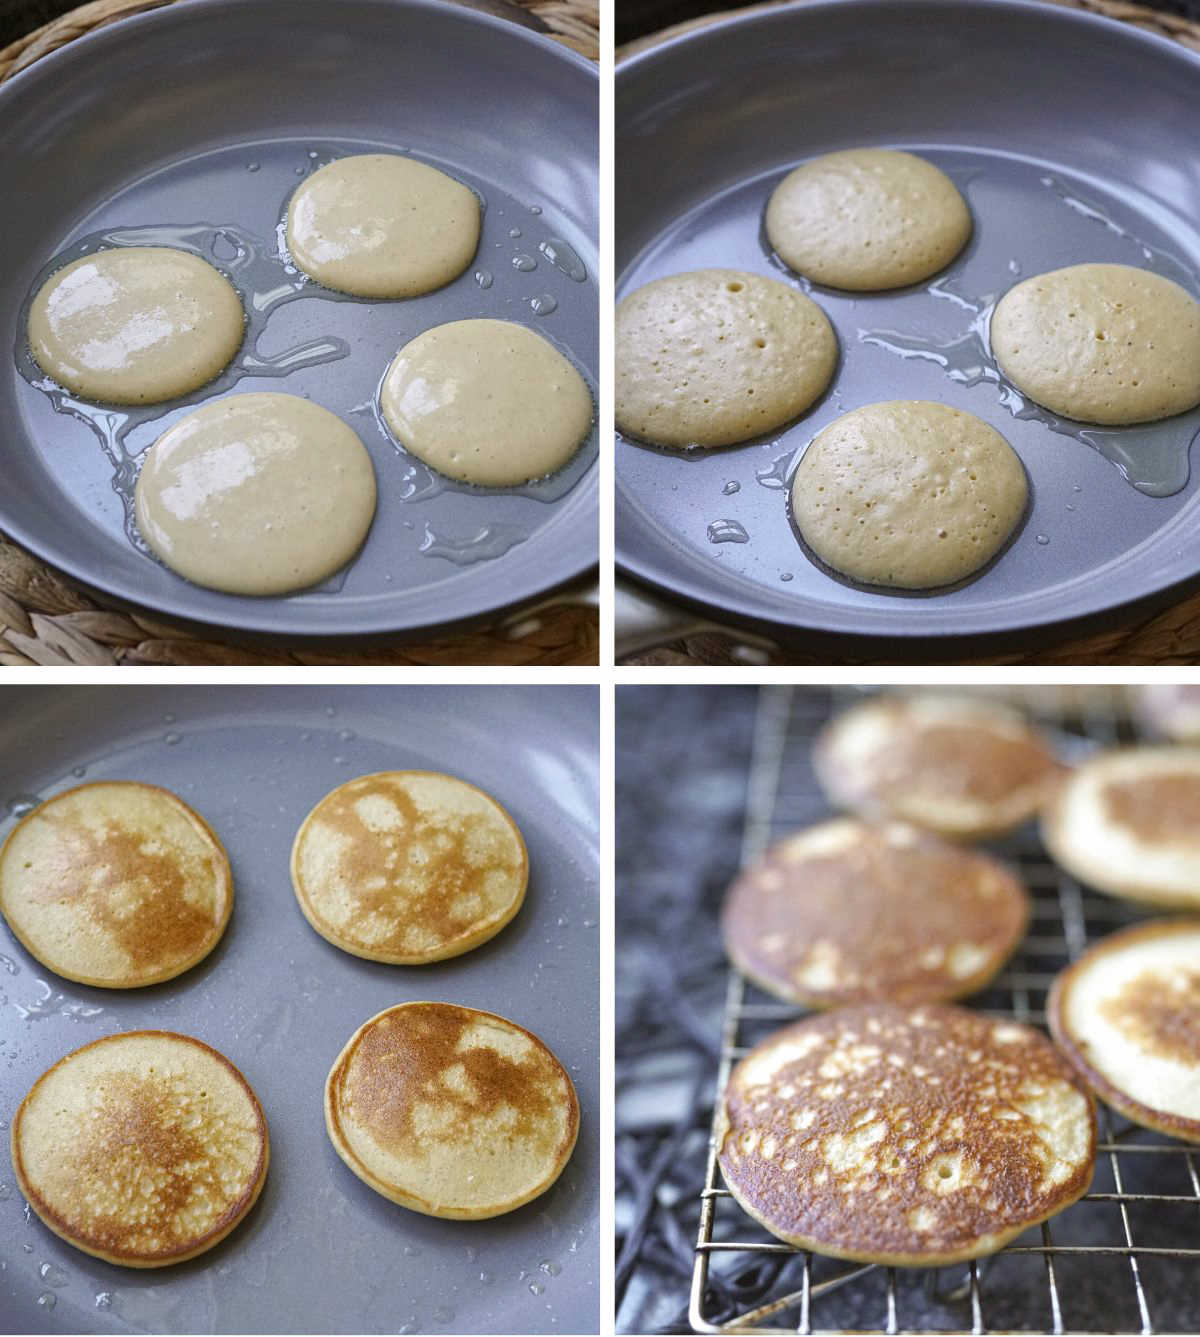 Process shots showing how to cook the banana oat pancakes in a non-stick ceramic skillet.